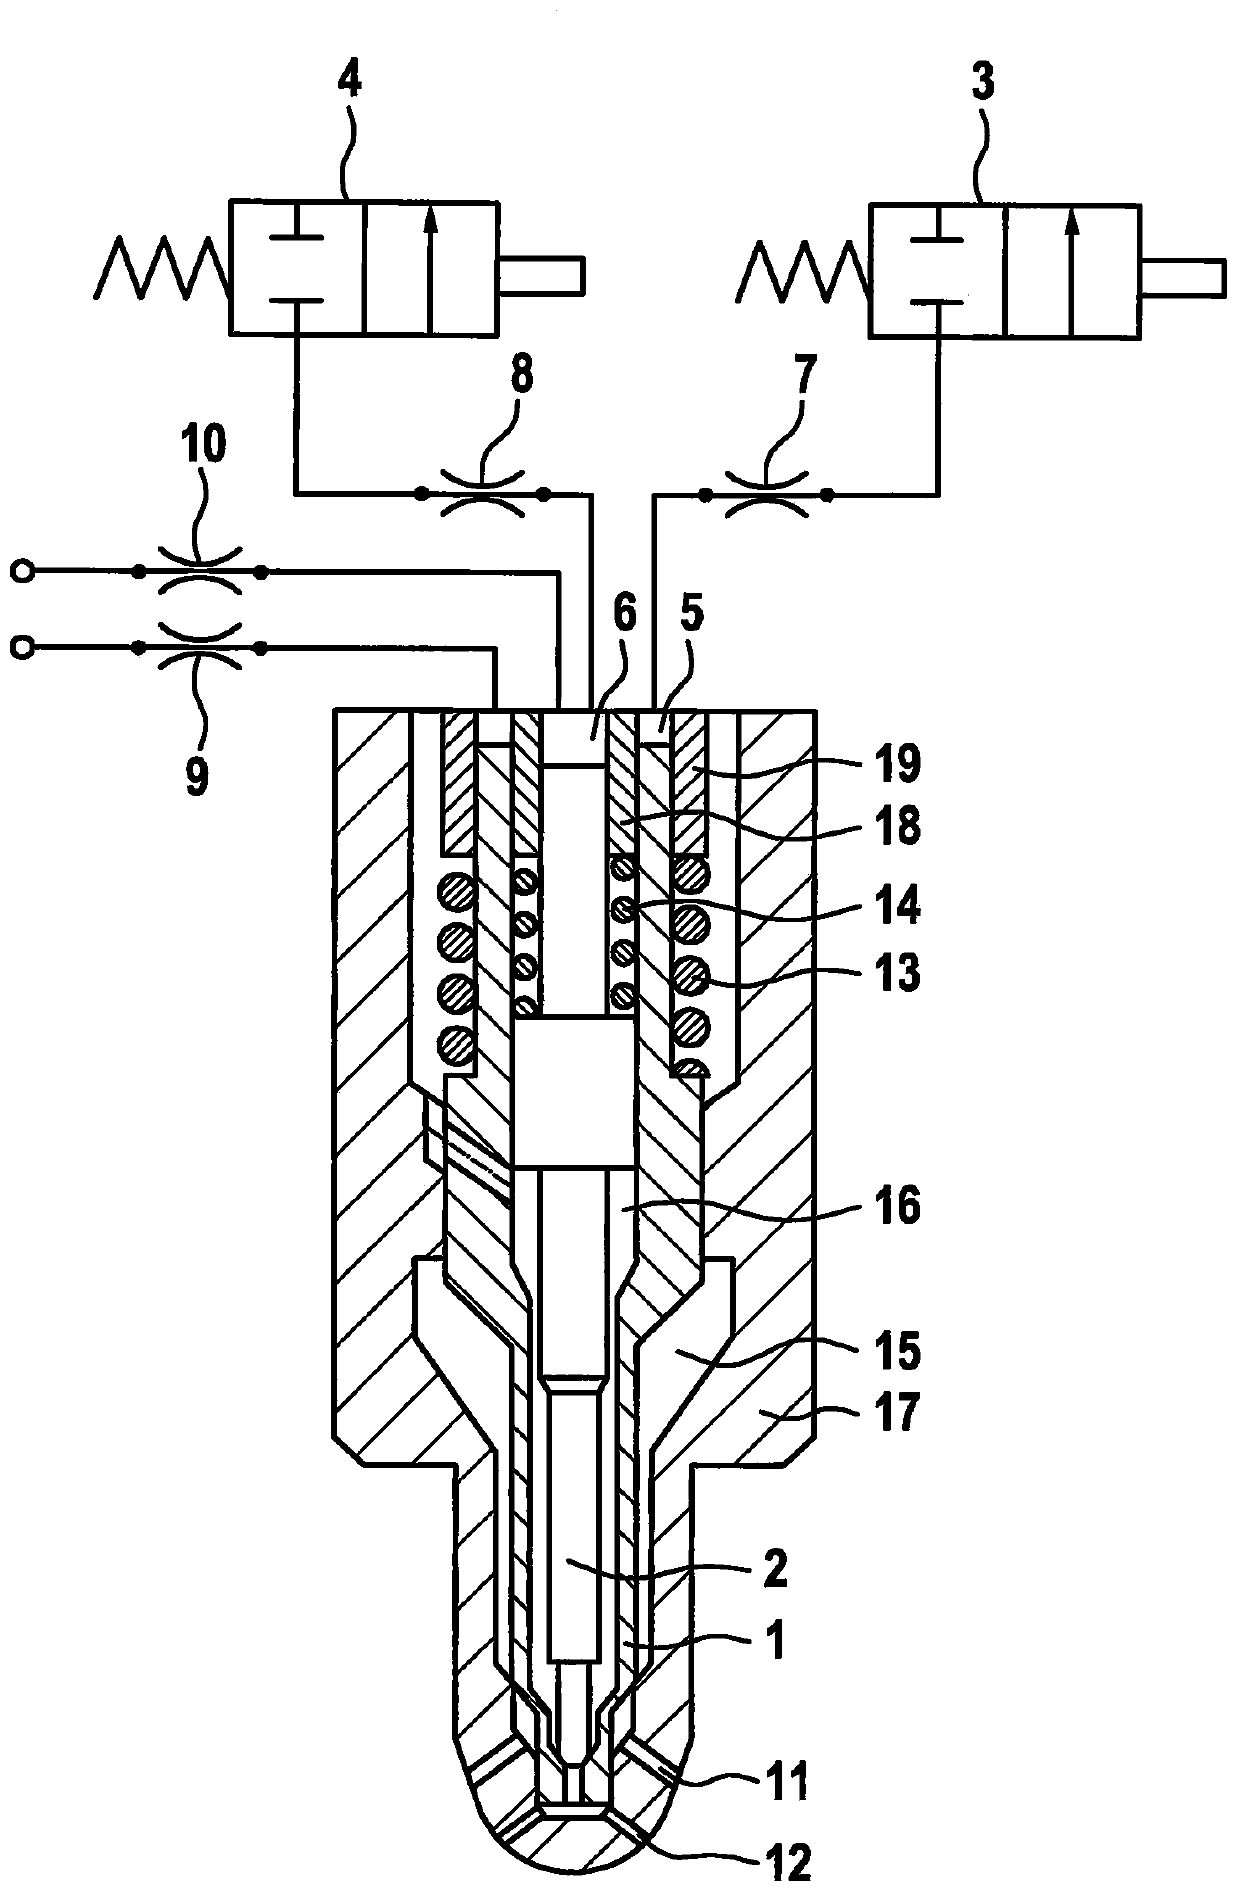 Method for operating a fuel injector